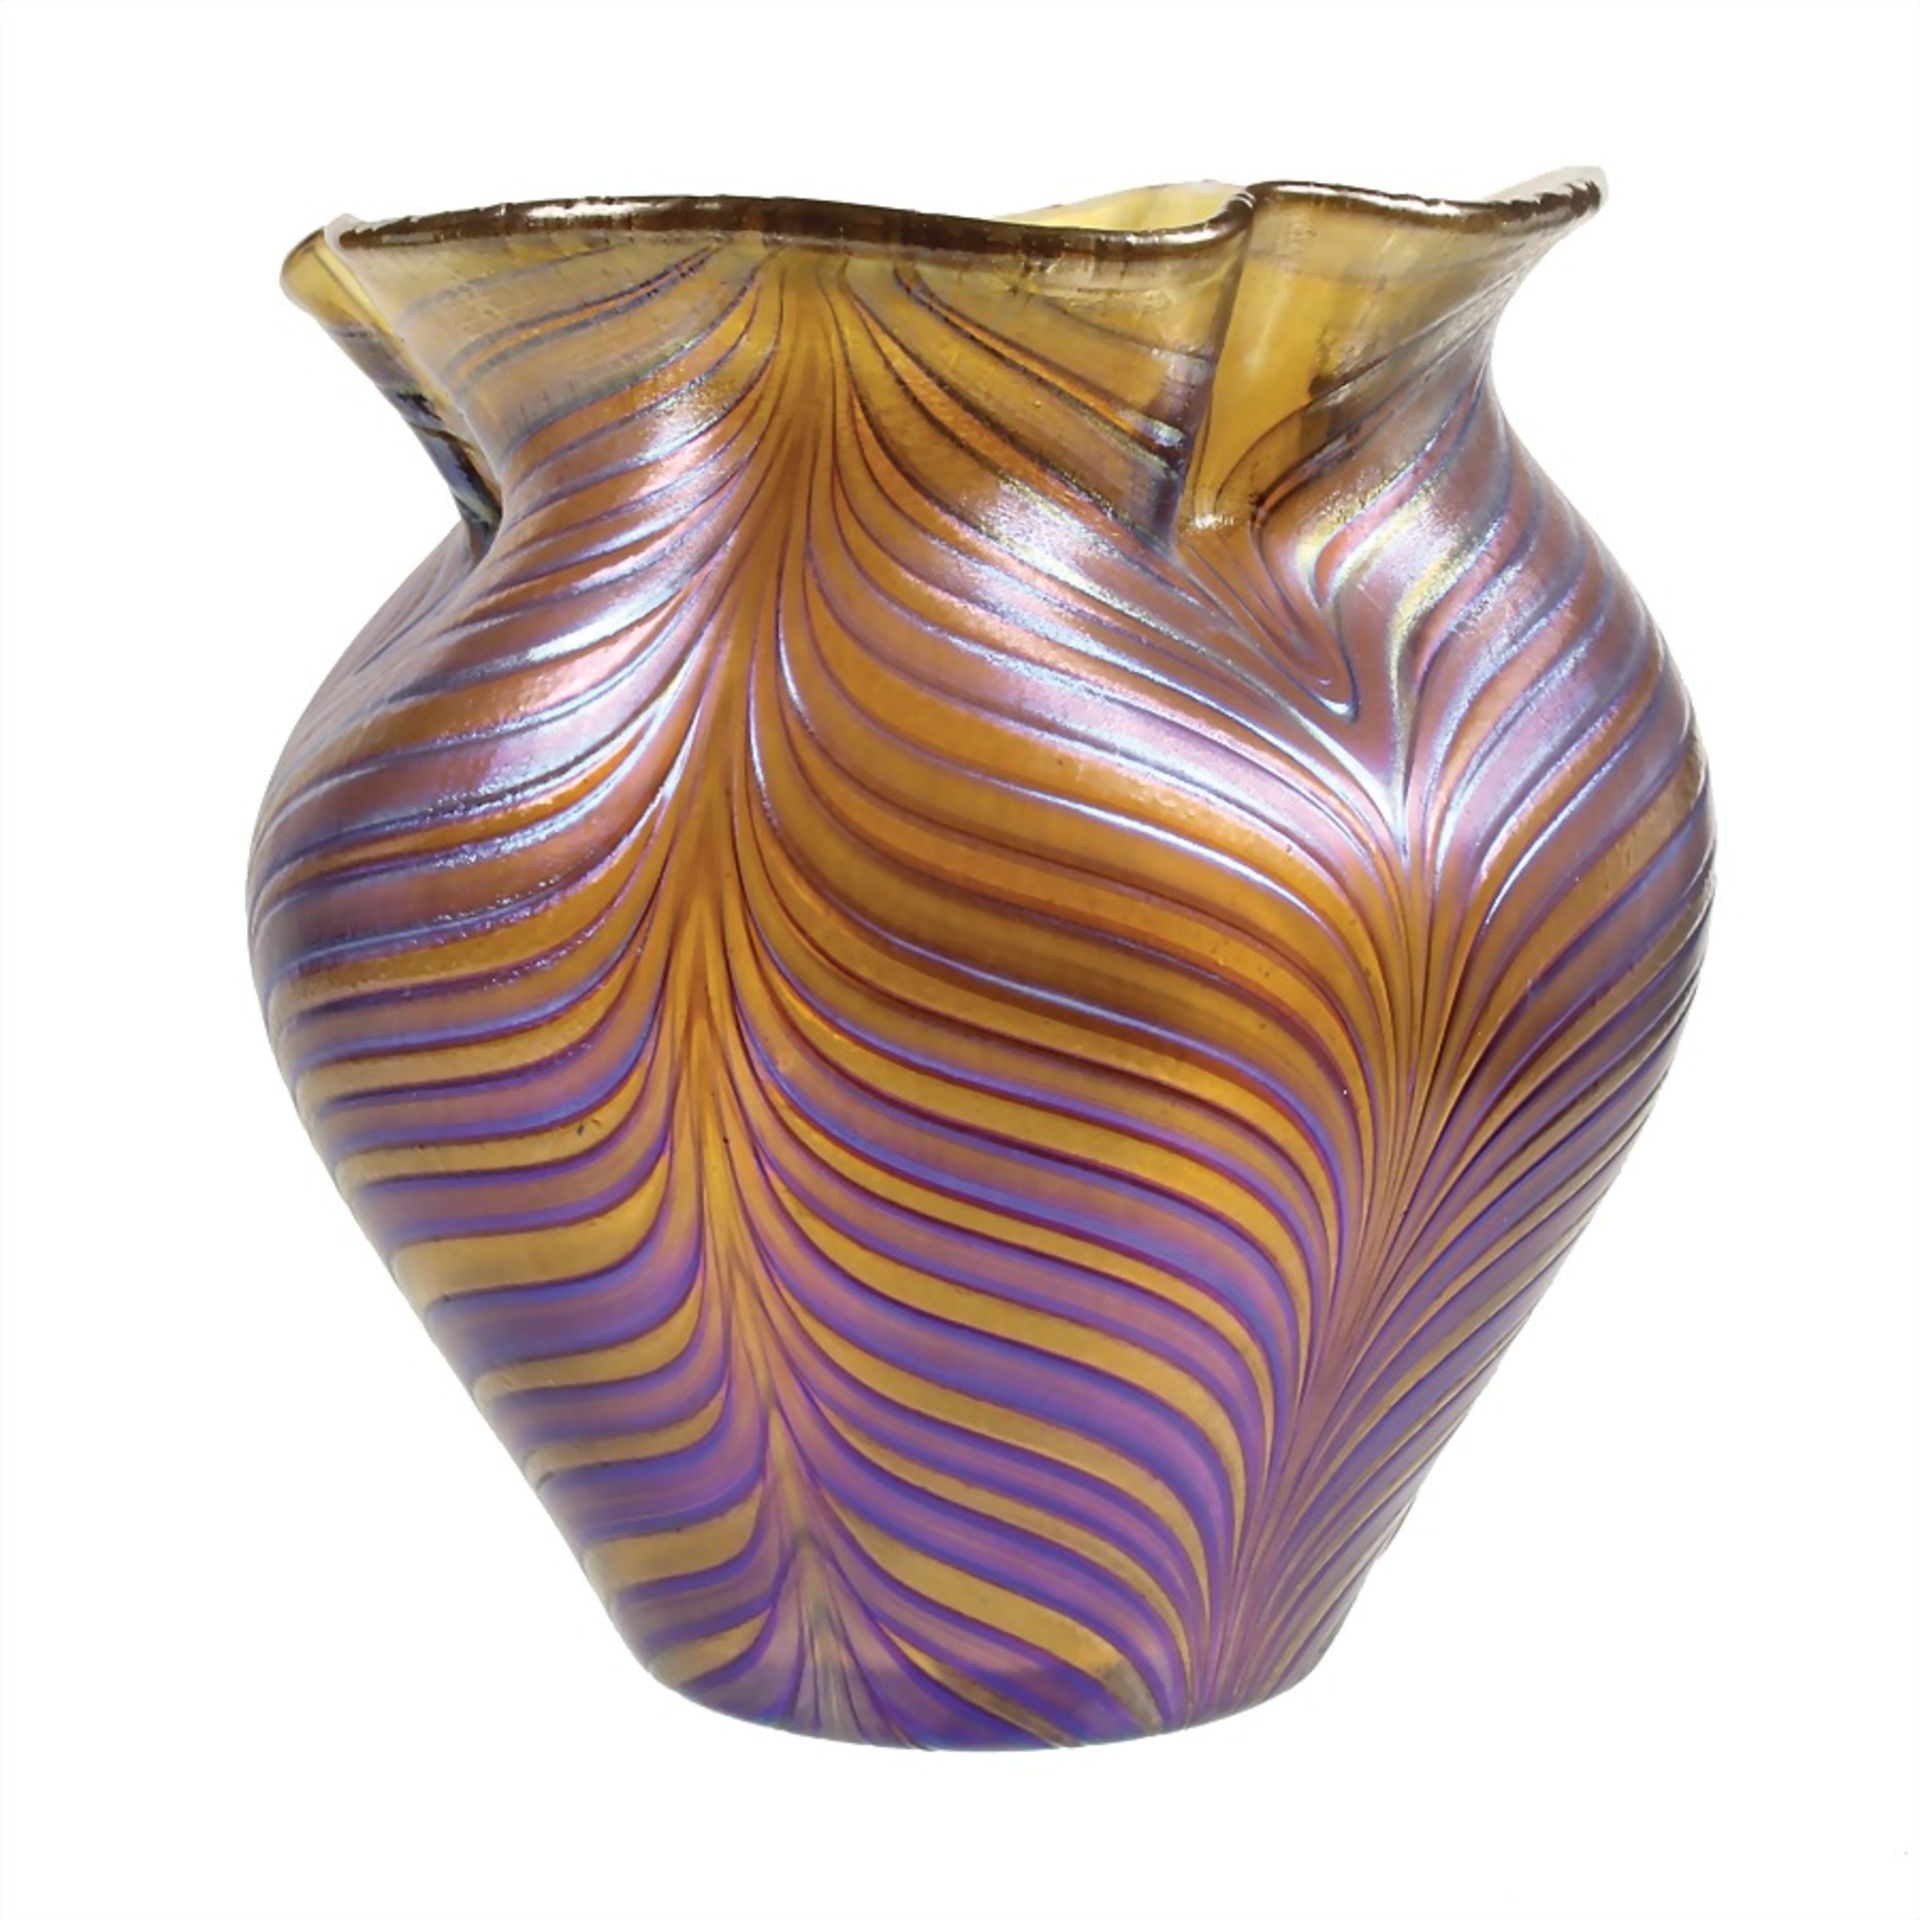 contemporary vase blown, circular basic form with triangular wall, body and neck egde is threefold